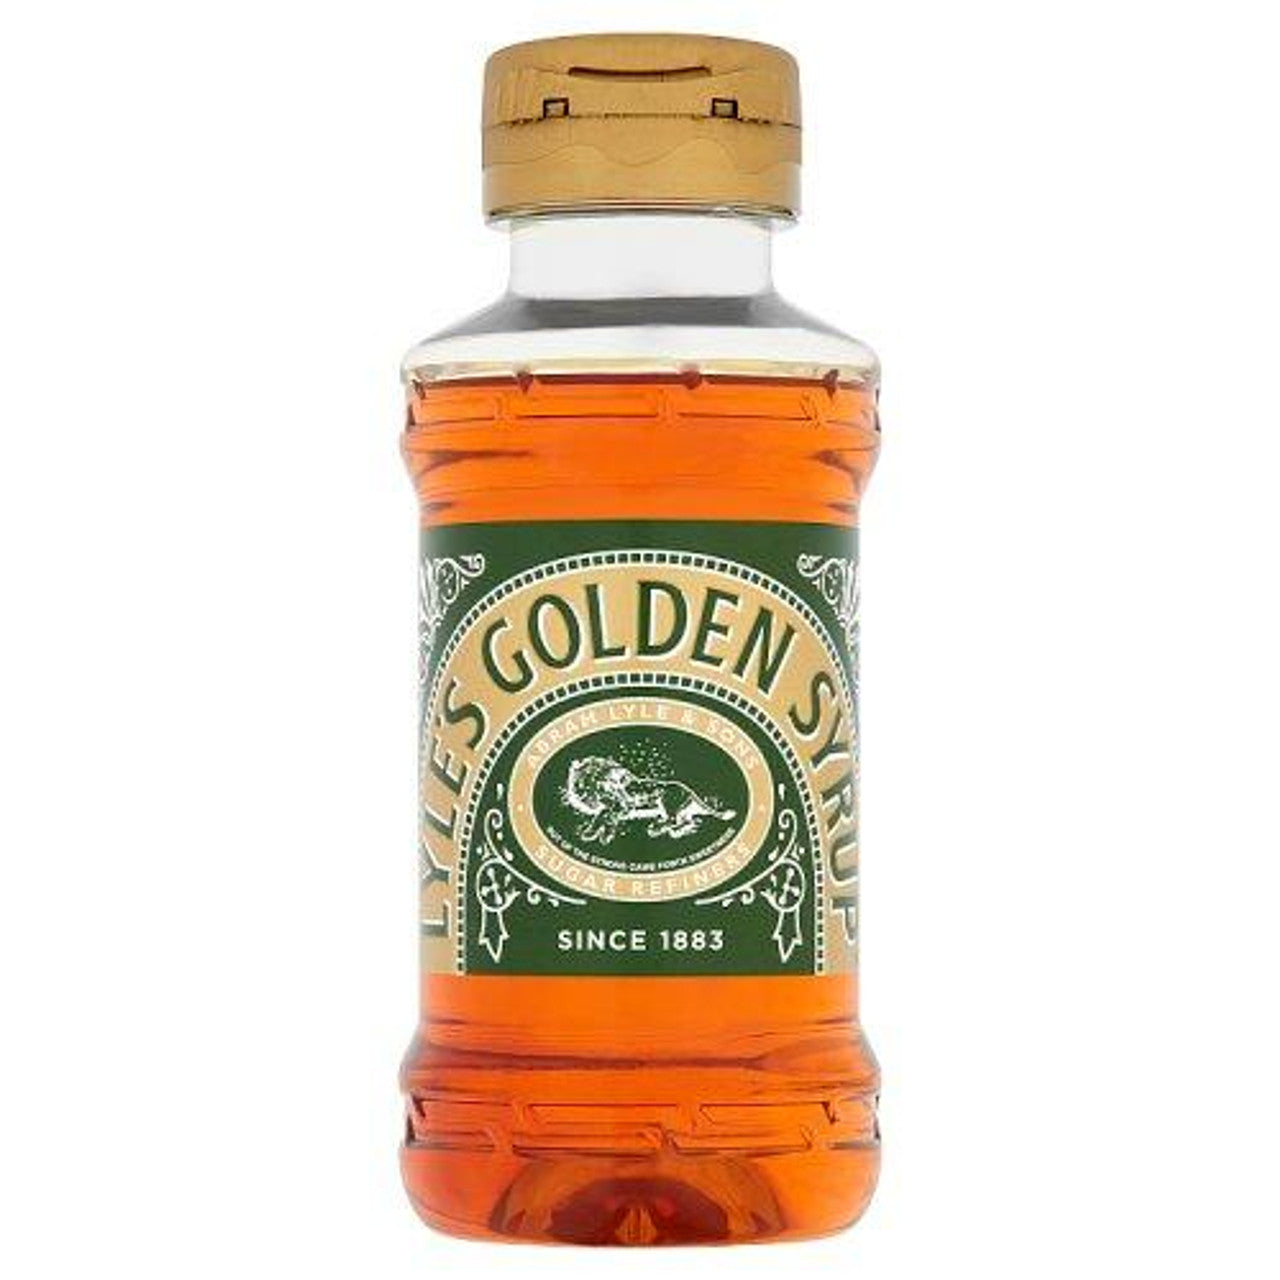 Lyle's: Golden Syrup: Squeezy 325g (11.5oz)